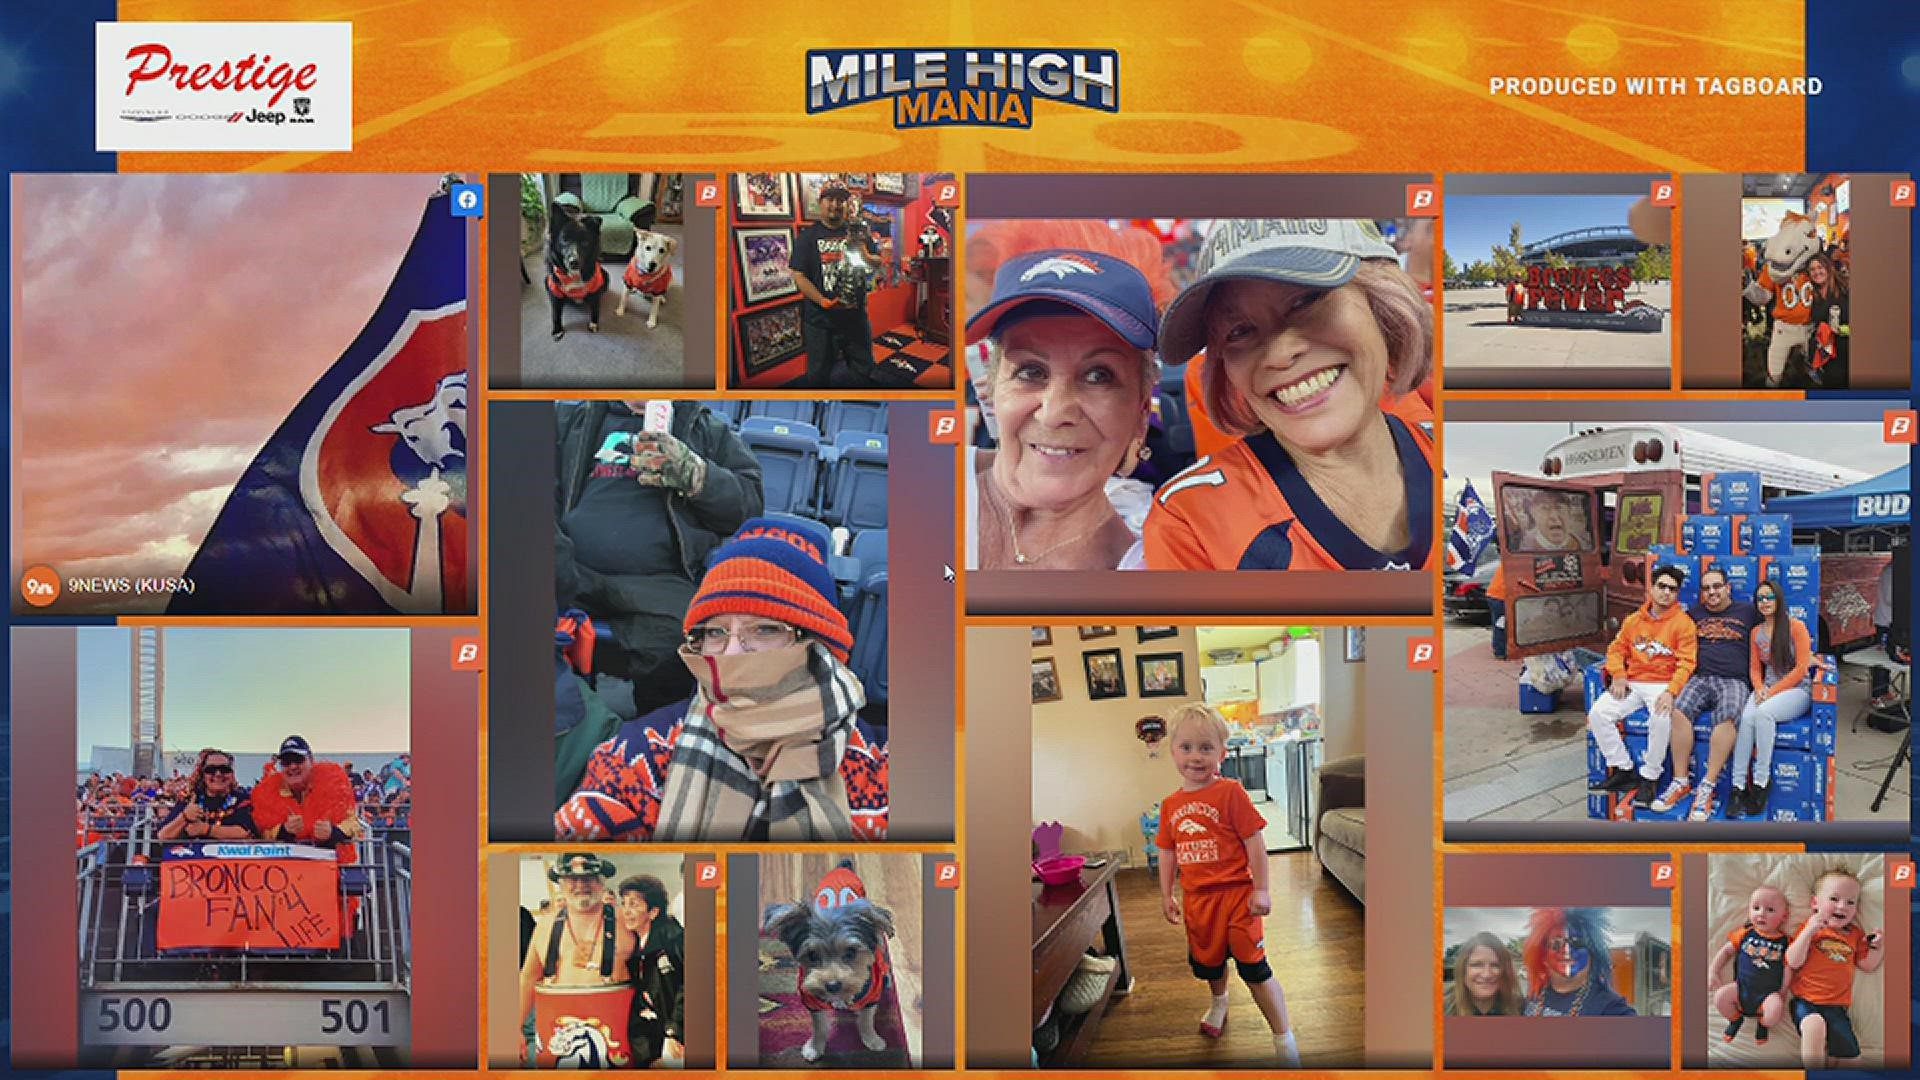 The Broncos are taking on the Seattle Seahawks in their first game of the season Monday night and Broncos Country is ready to cheer them to victory.